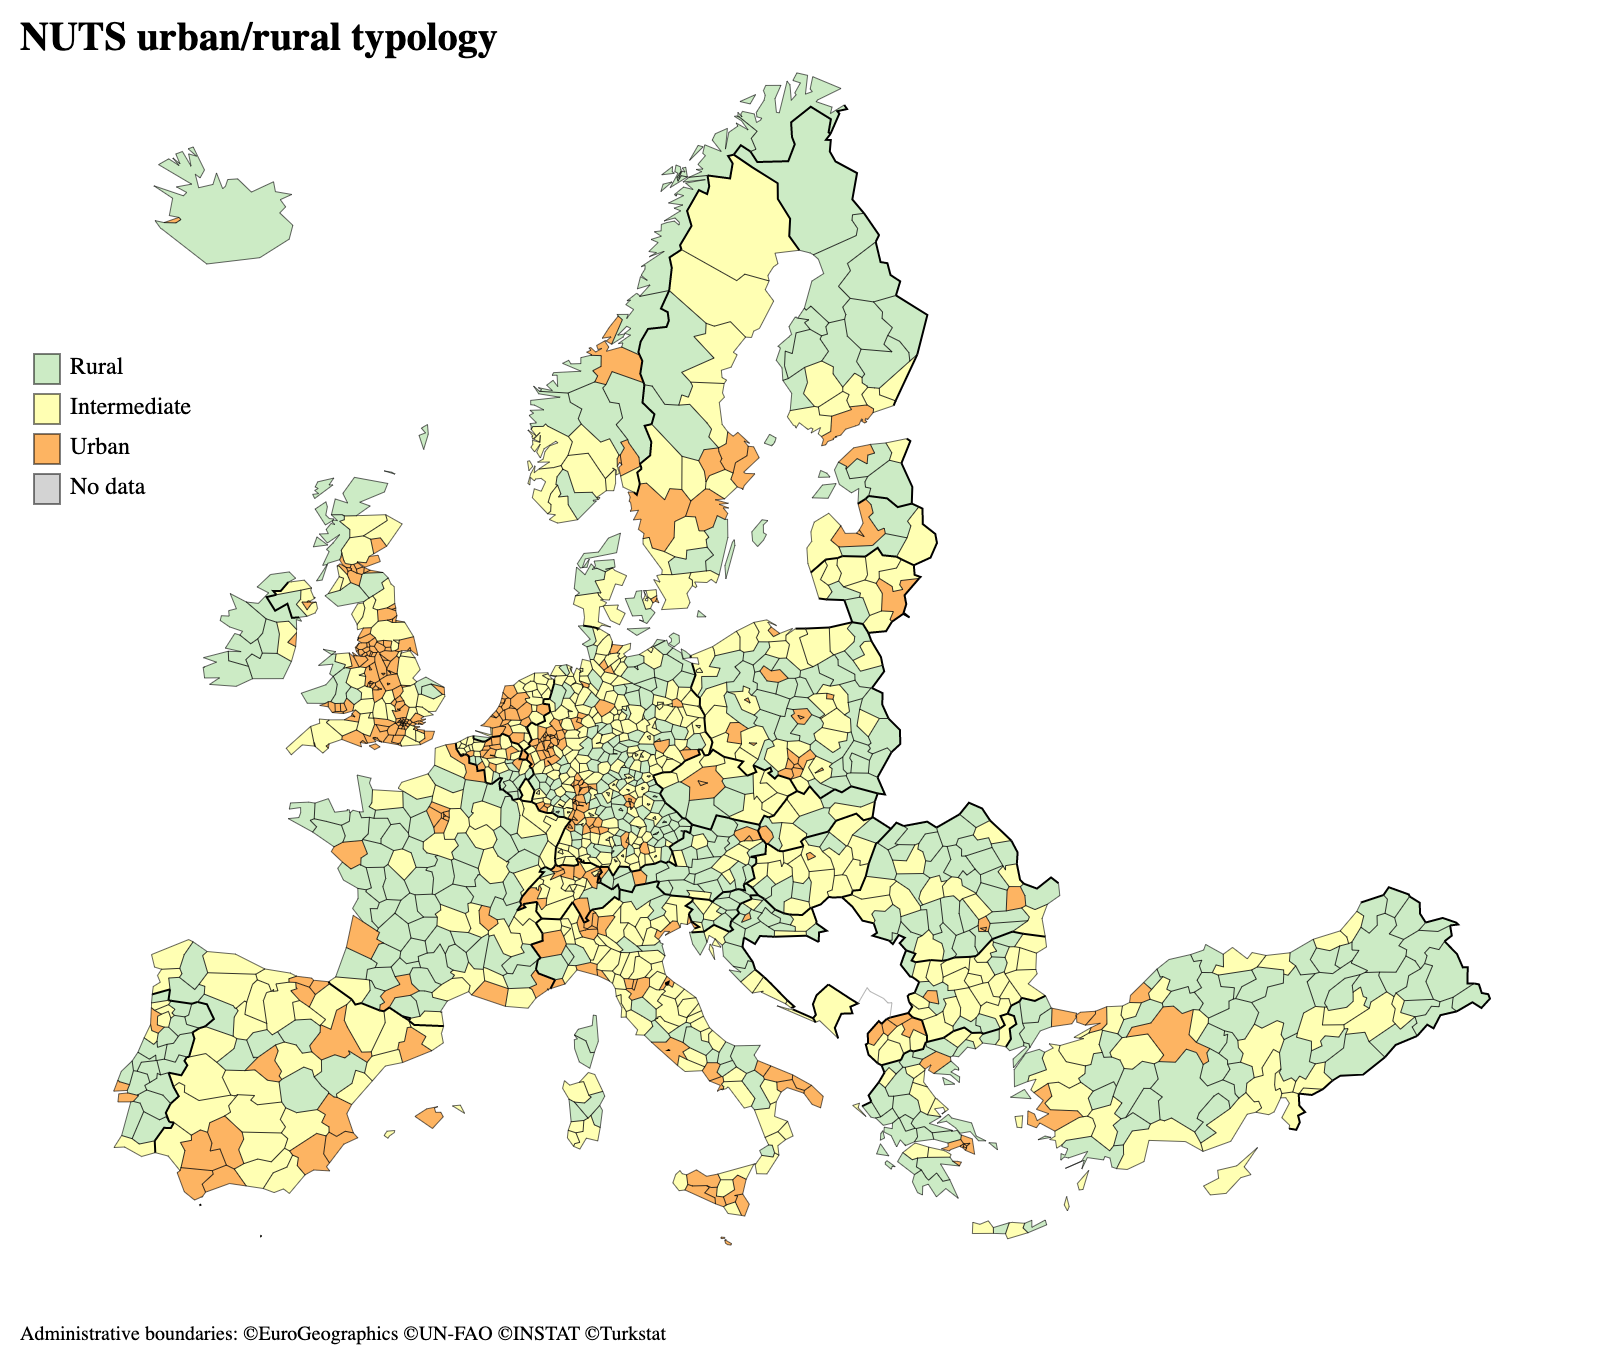 A choropleth map showing the classification of EU regions into rural, intermediate and urban regions